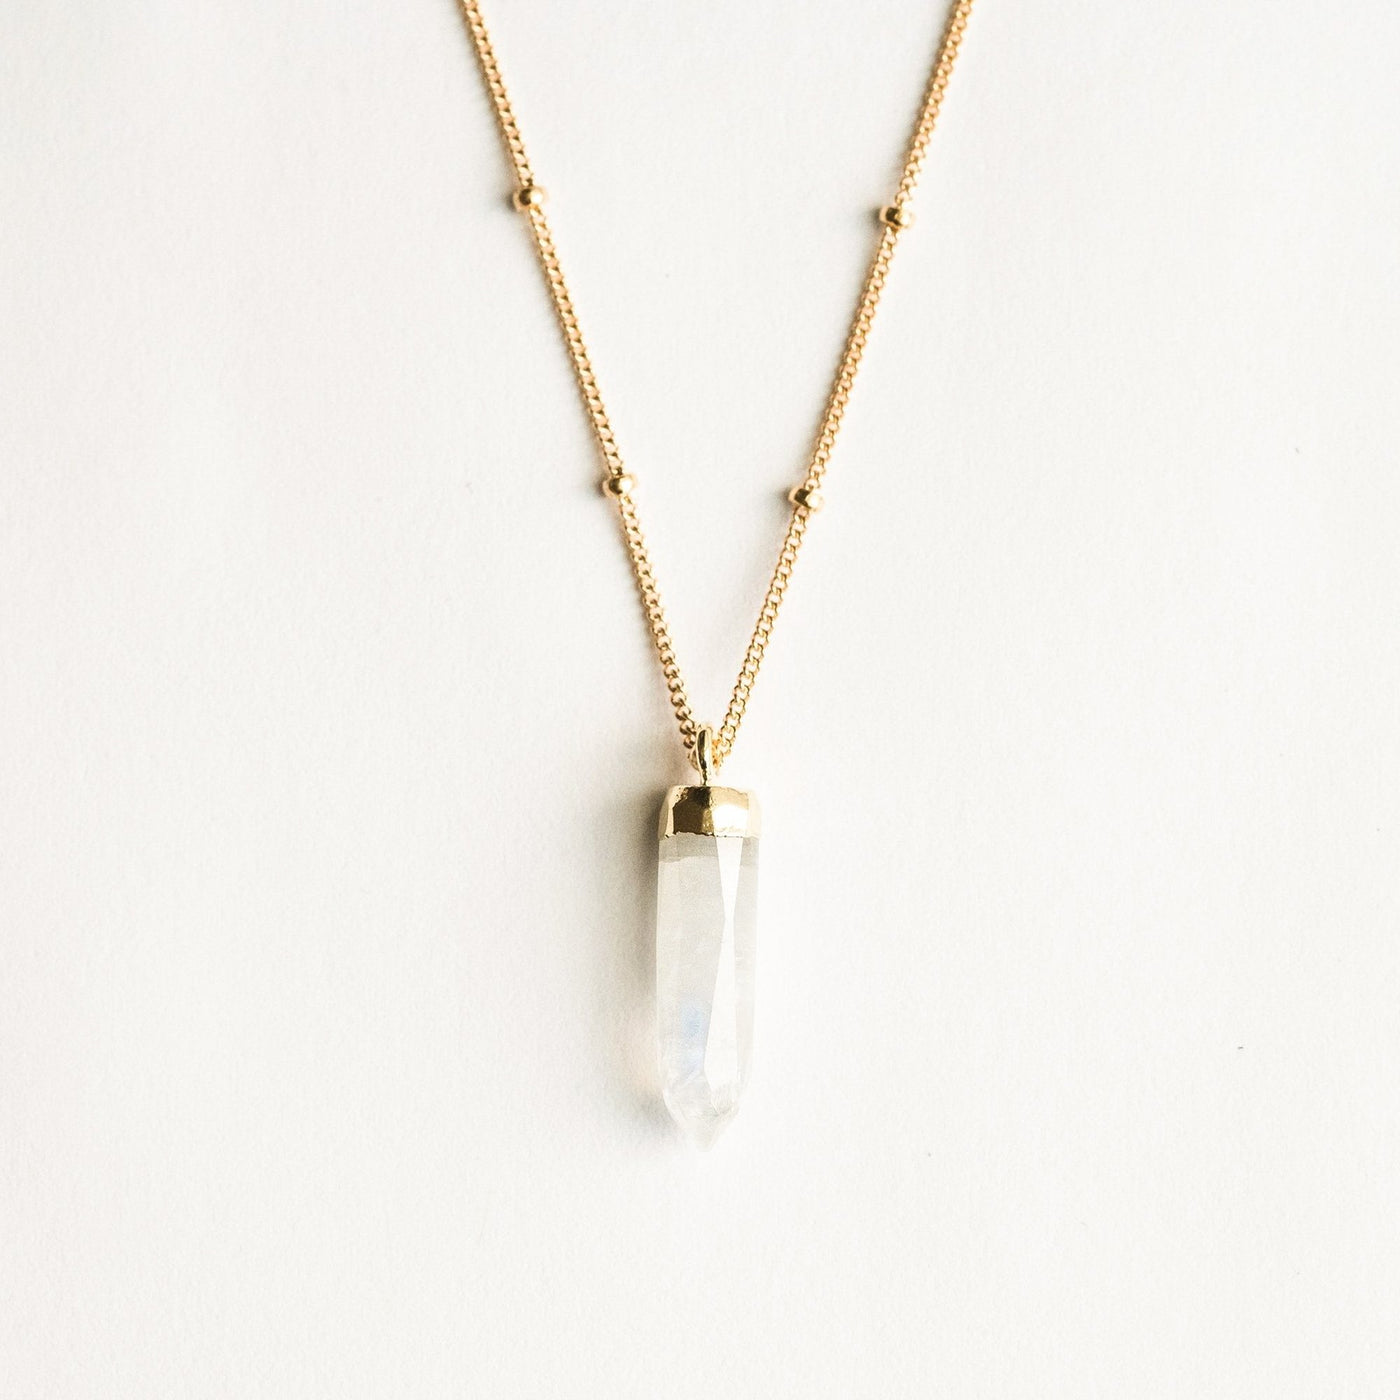 Moonstone Spike Necklace by Simple & Dainty Jewelry